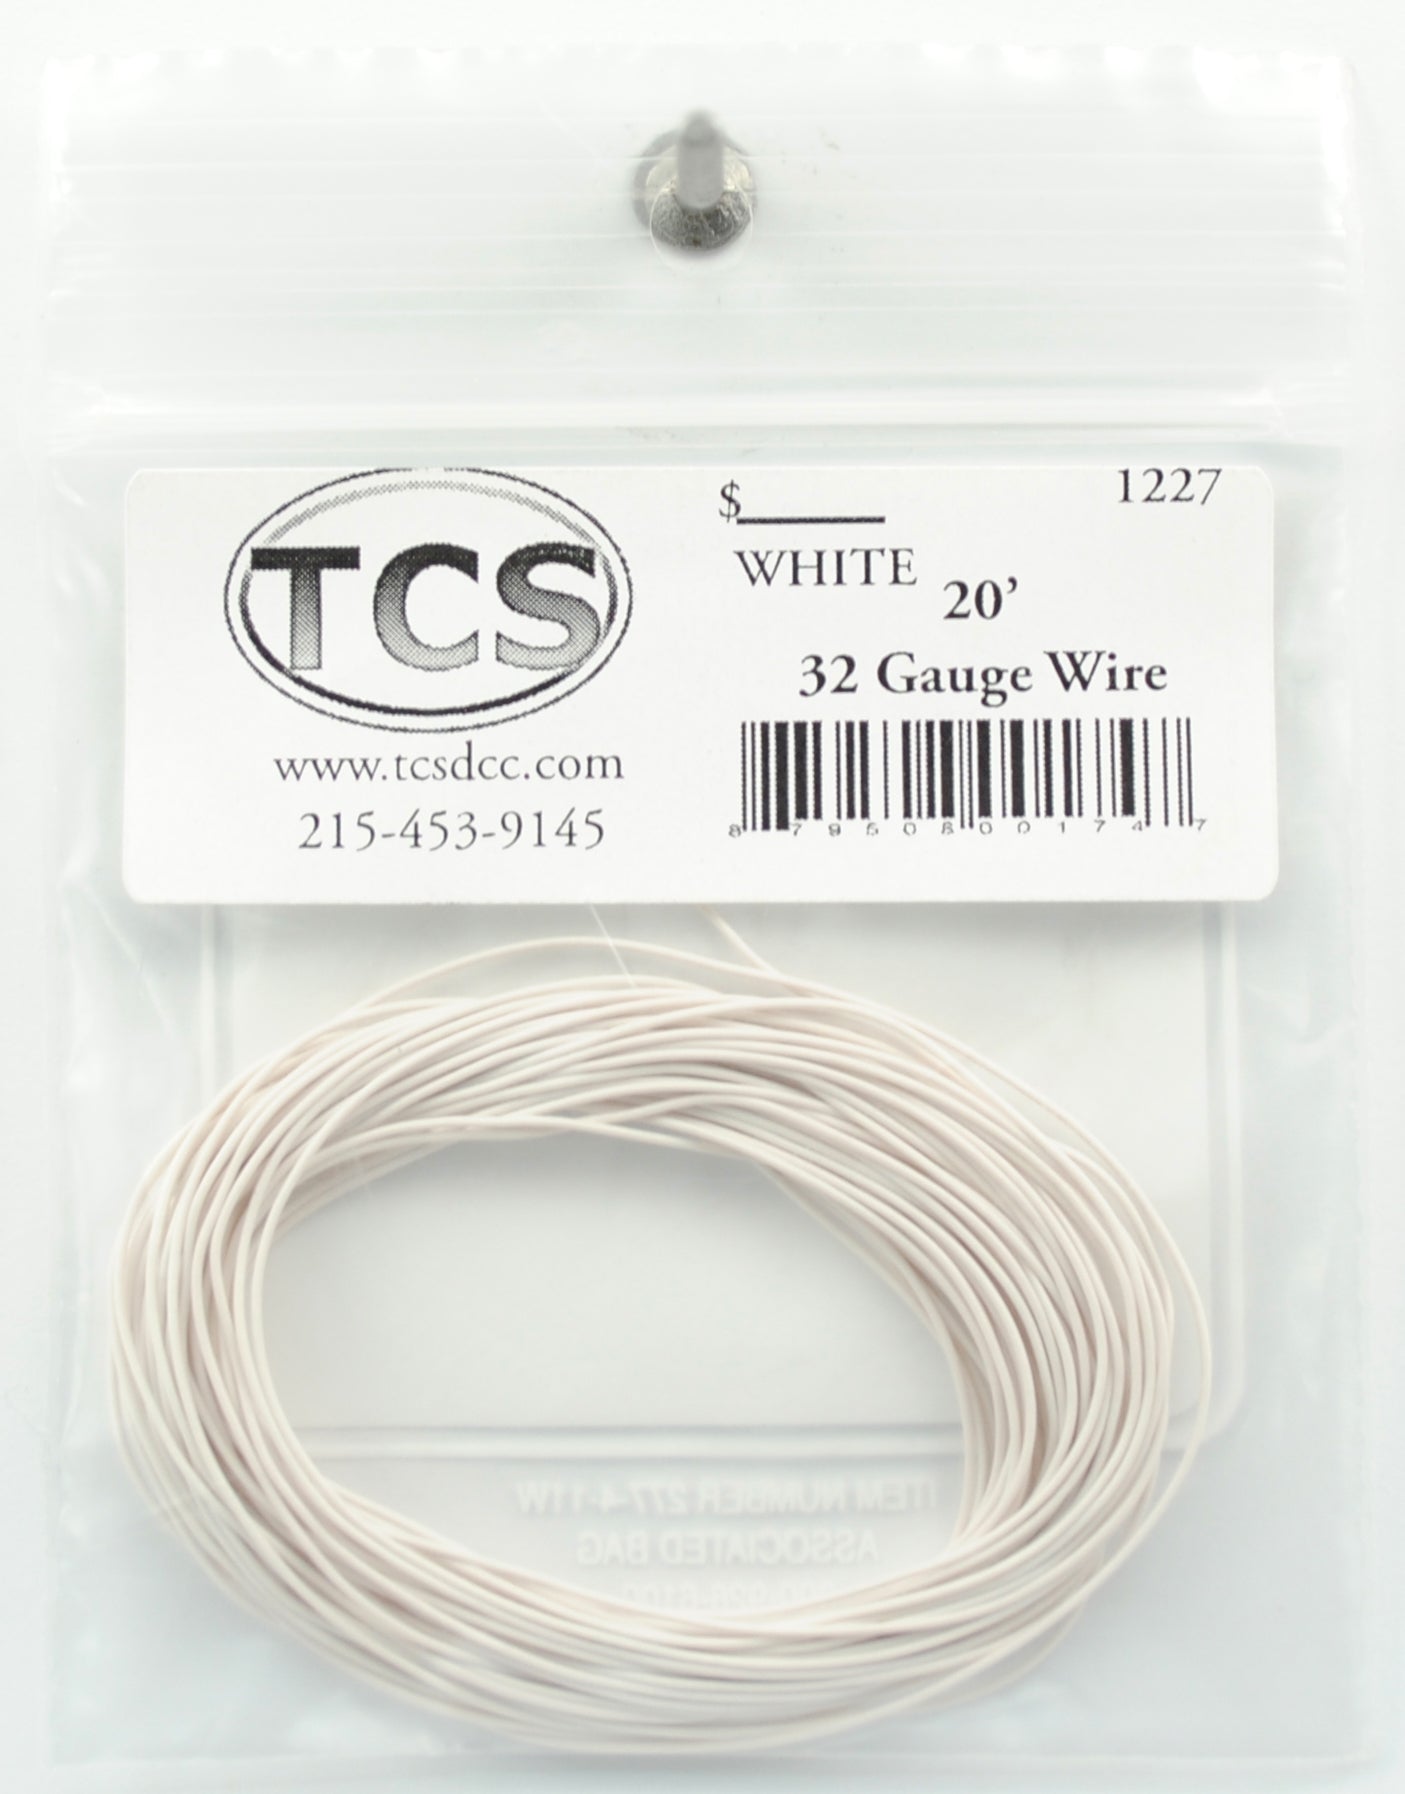 Train Control Systems 1227 20' of 32 Gauge Wire, White